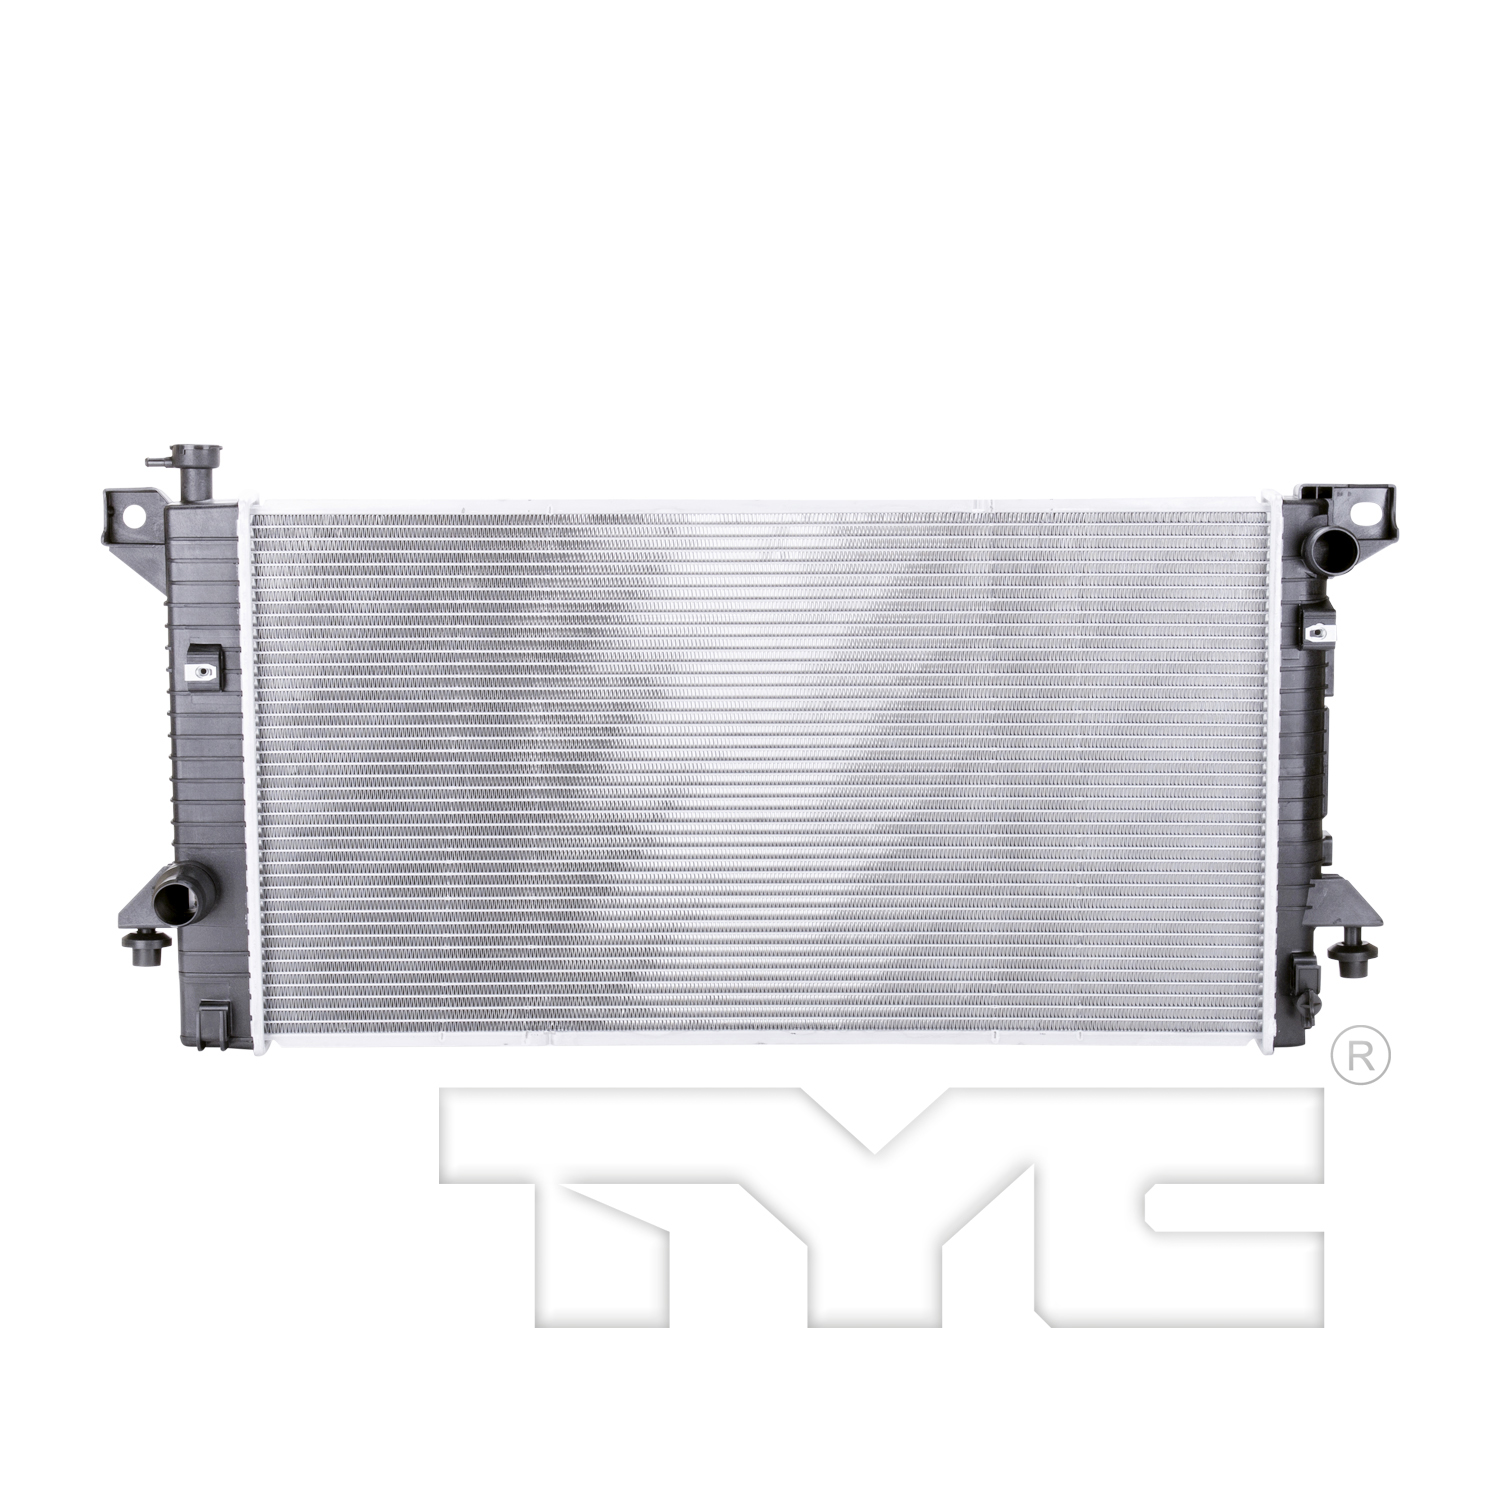 Aftermarket RADIATORS for FORD - F-150, F-150,09-10,Radiator assembly